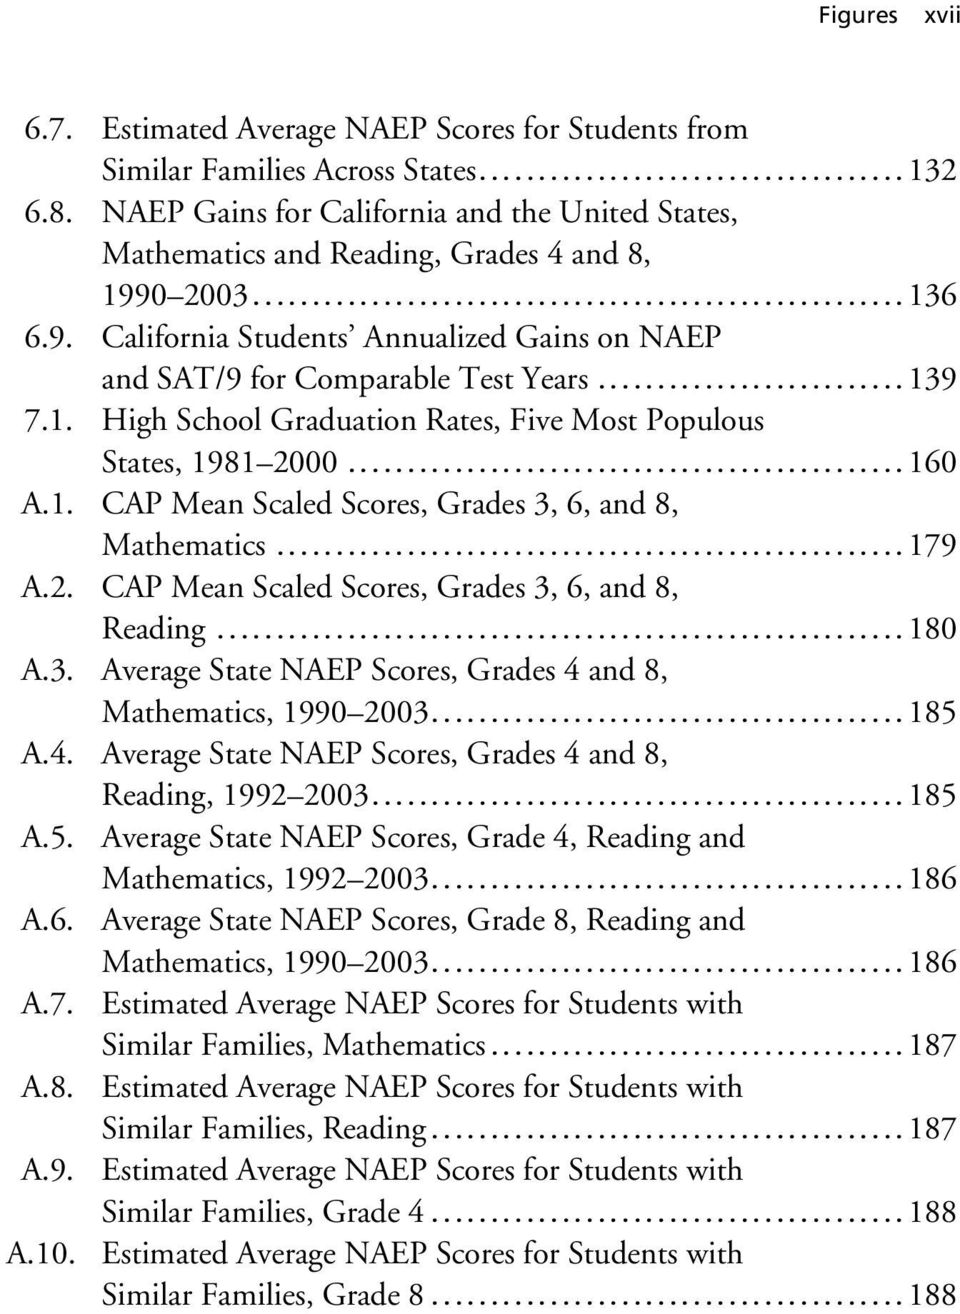 1. High School Graduation Rates, Five Most Populous States, 1981 2000...160 A.1. CAP Mean Scaled Scores, Grades 3, 6, and 8, Mathematics...179 A.2. CAP Mean Scaled Scores, Grades 3, 6, and 8, Reading.